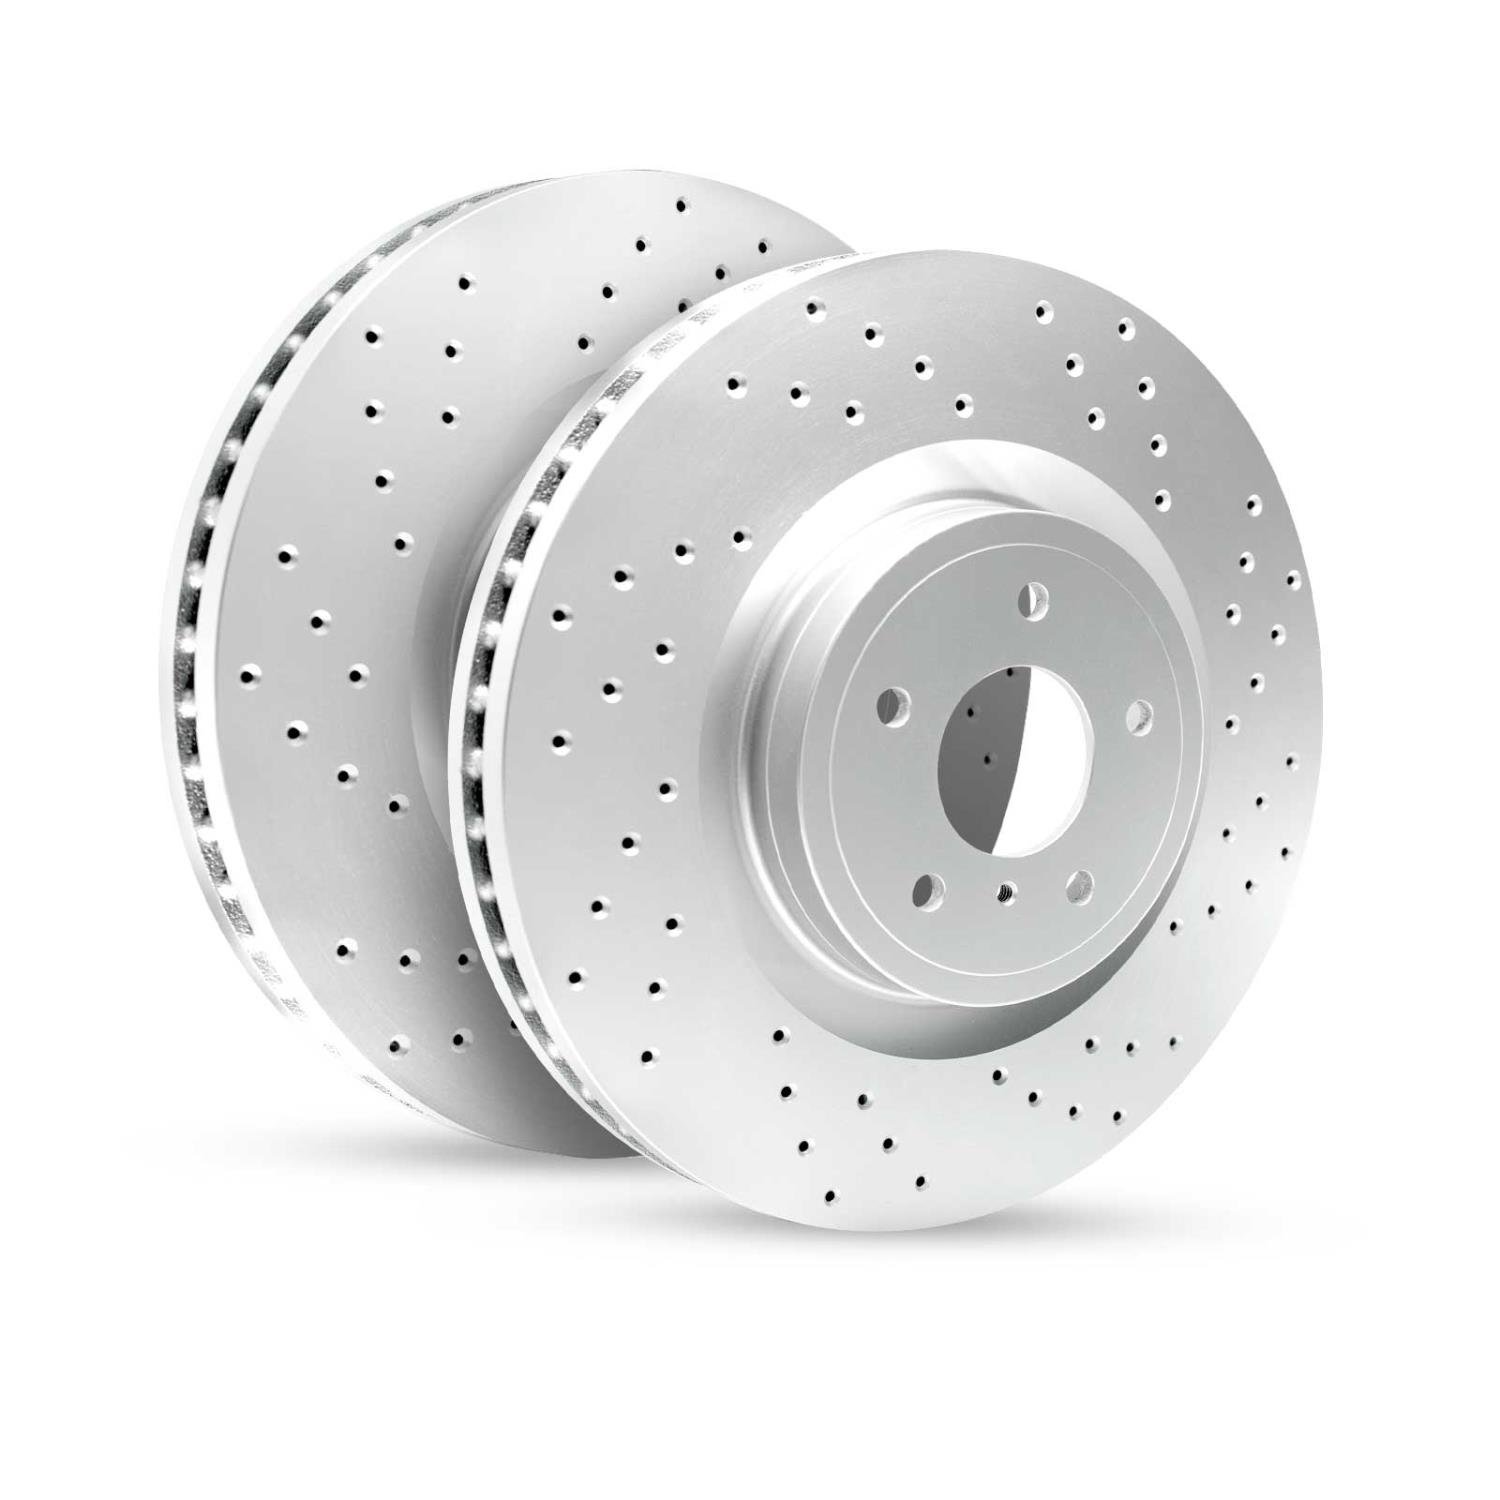 GEO-Carbon Drilled/Slotted Rotors, 2013-2020 BMW, Position: Rear